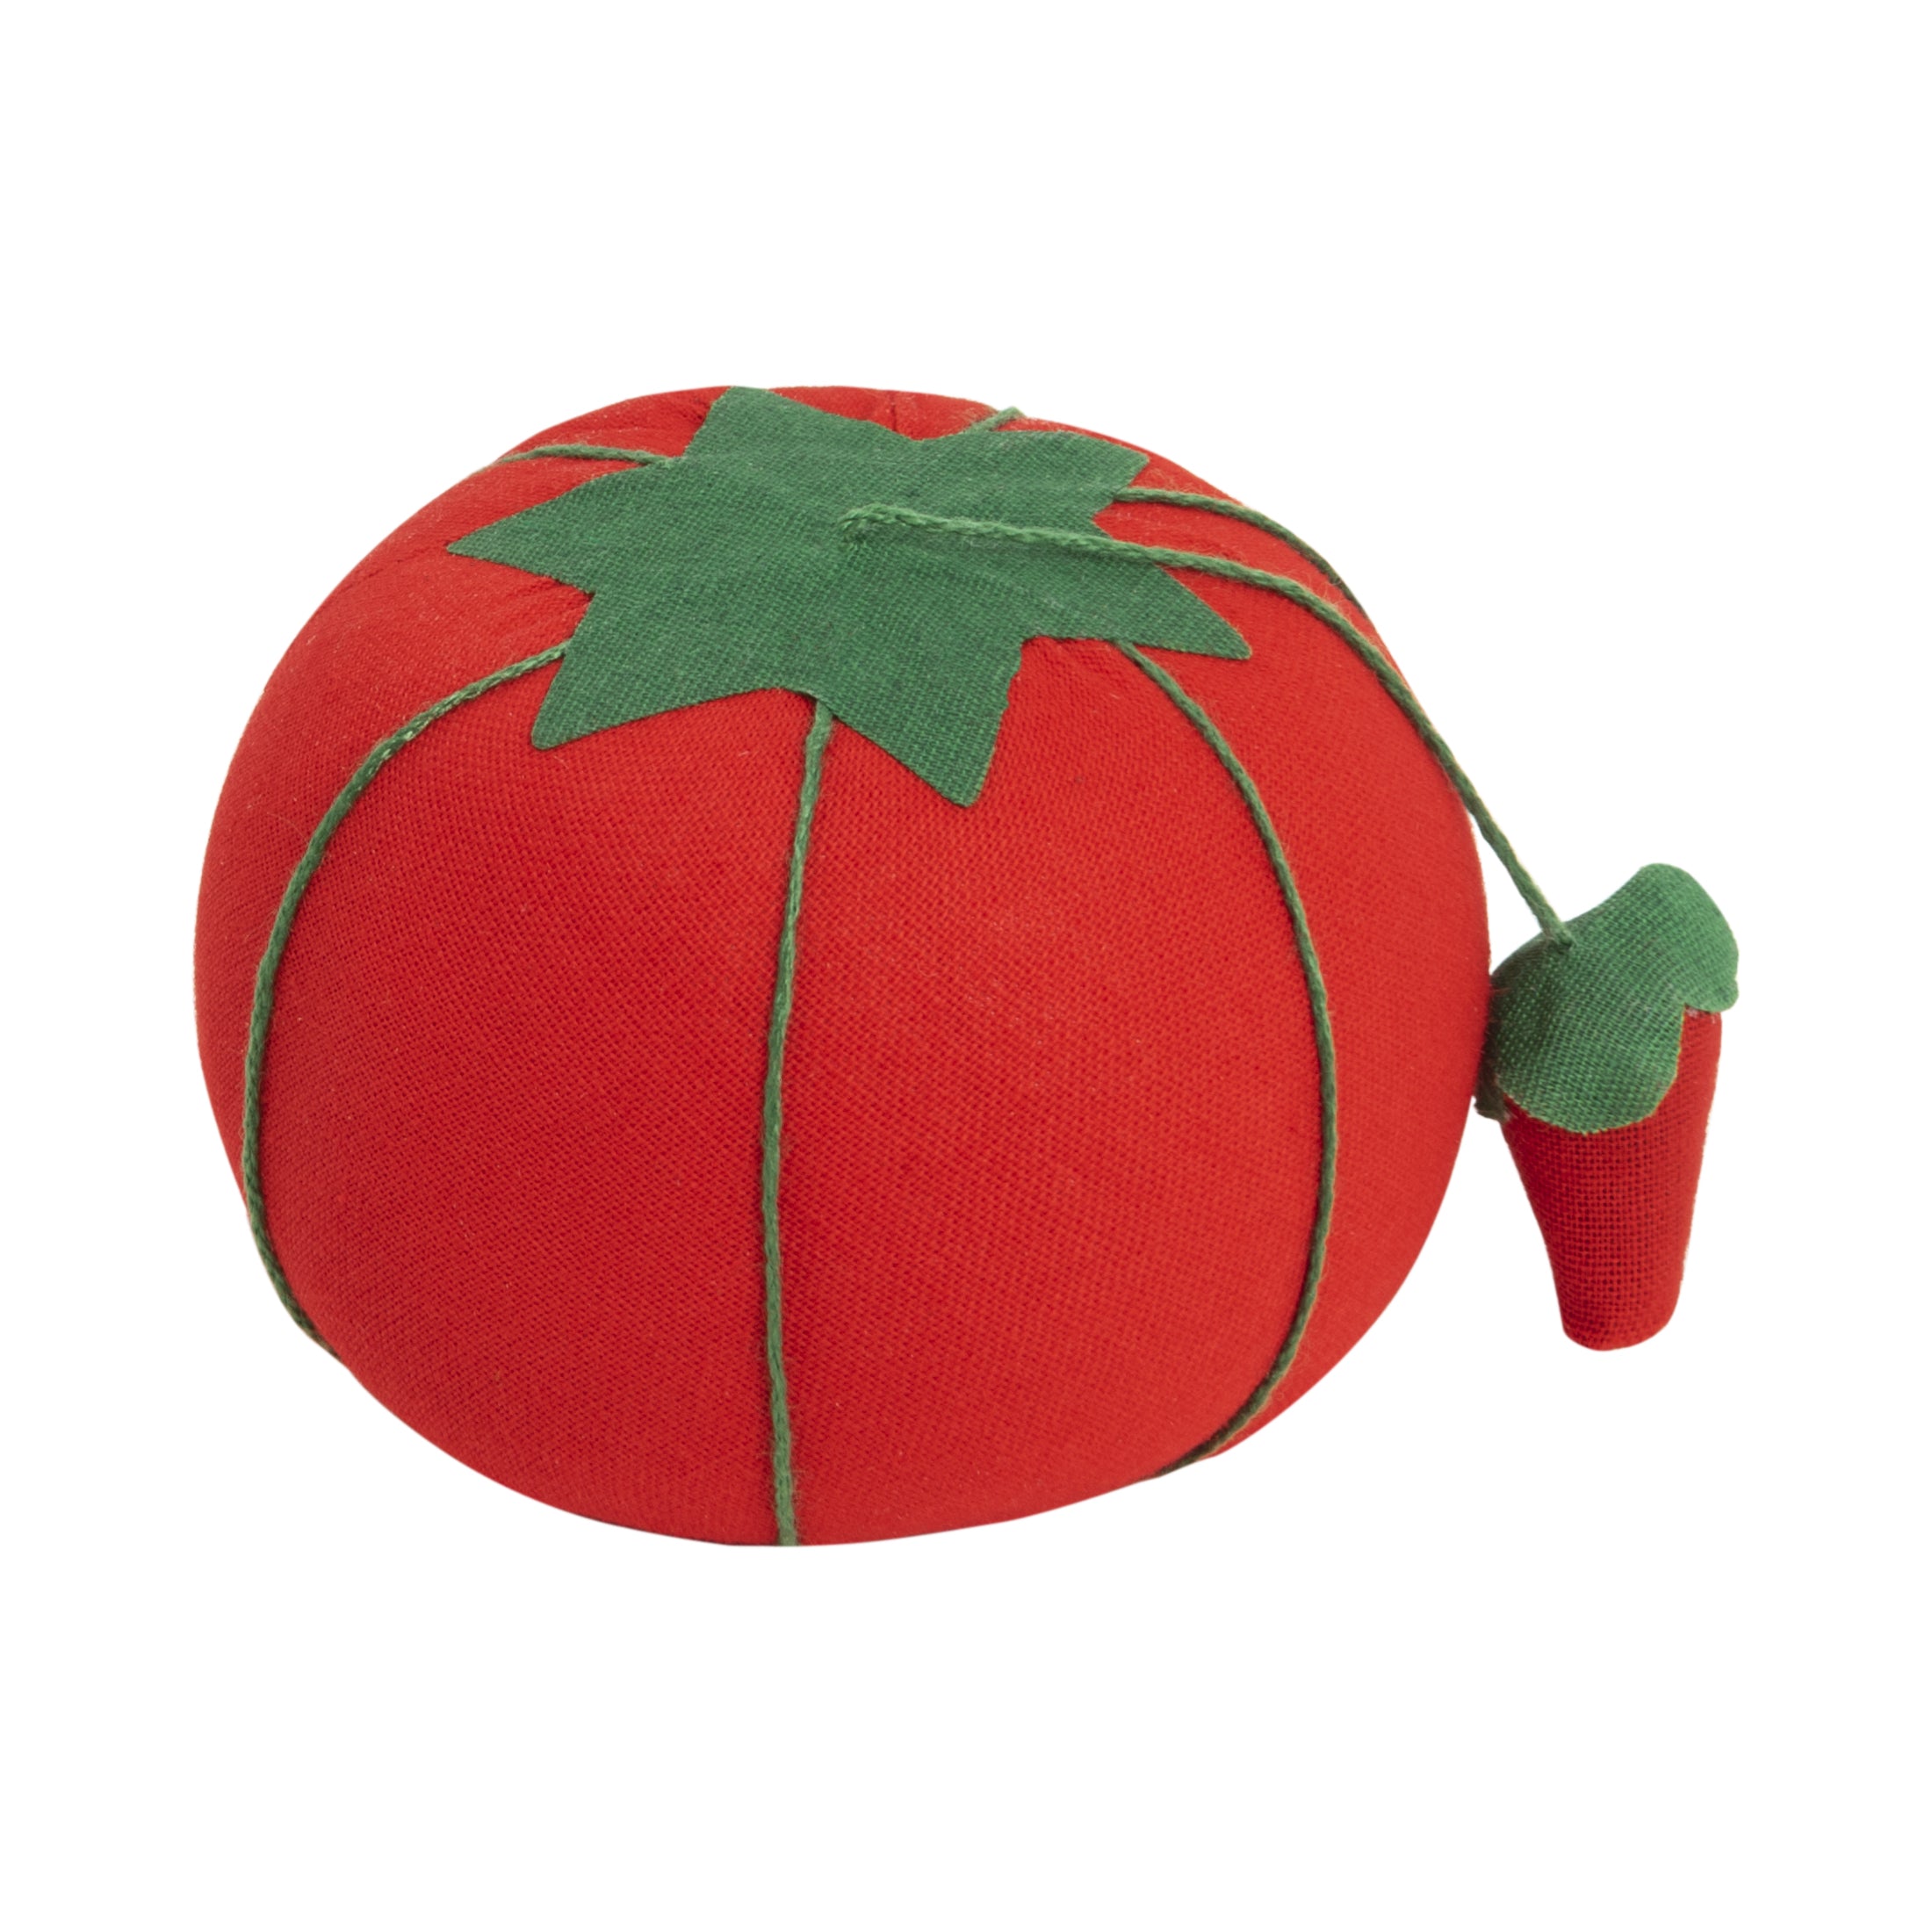 How To Make a Tomato Pin Cushion // Free Pattern - You Make It Simple